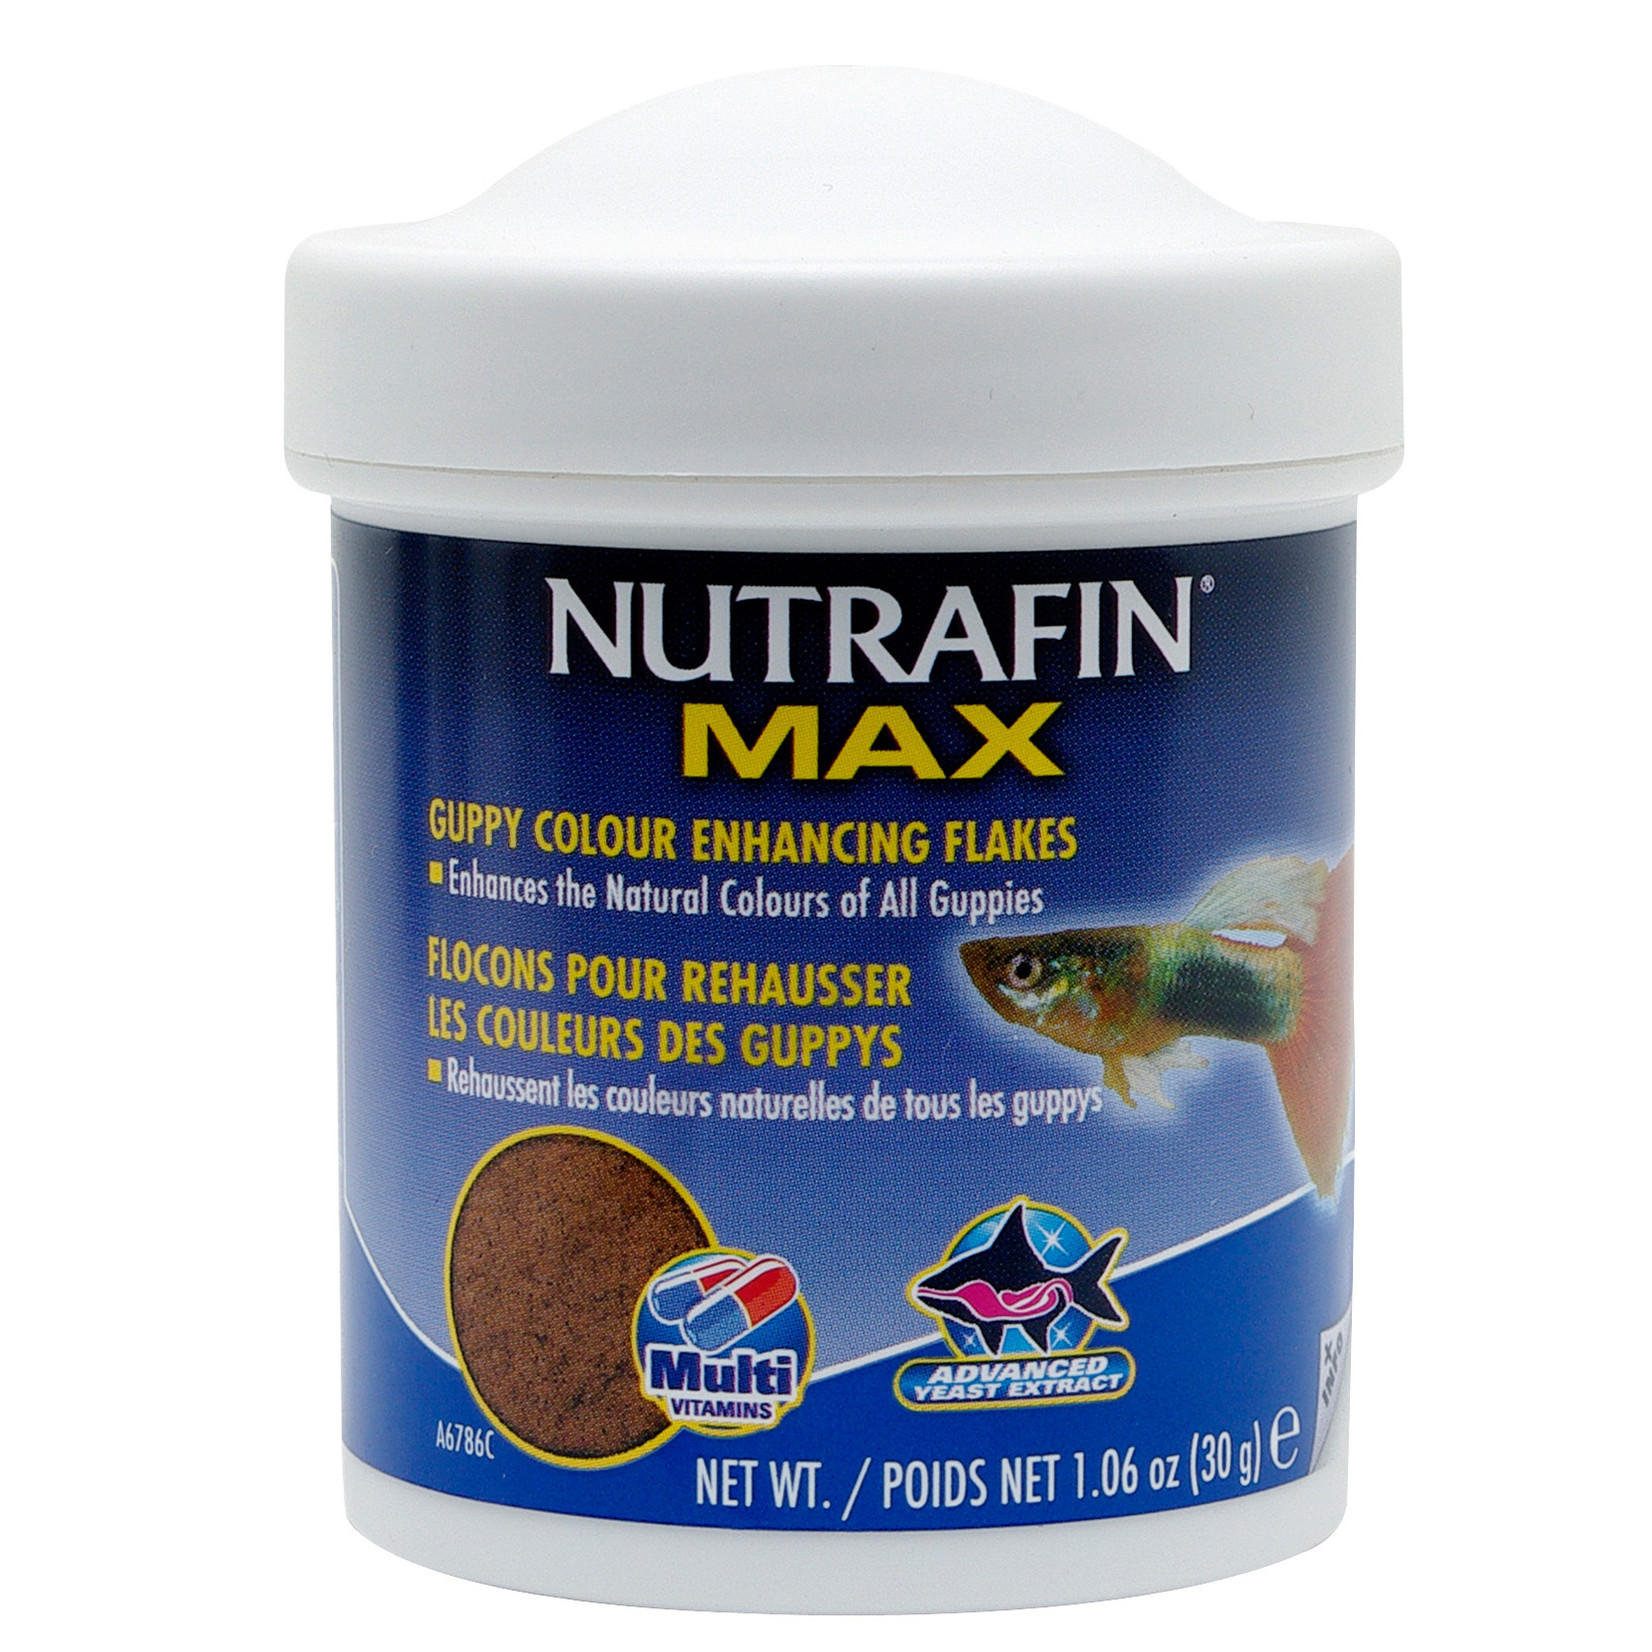 NUTRIENCE Nutrafin Max Guppy Colour Enhancing Flakes 30 g